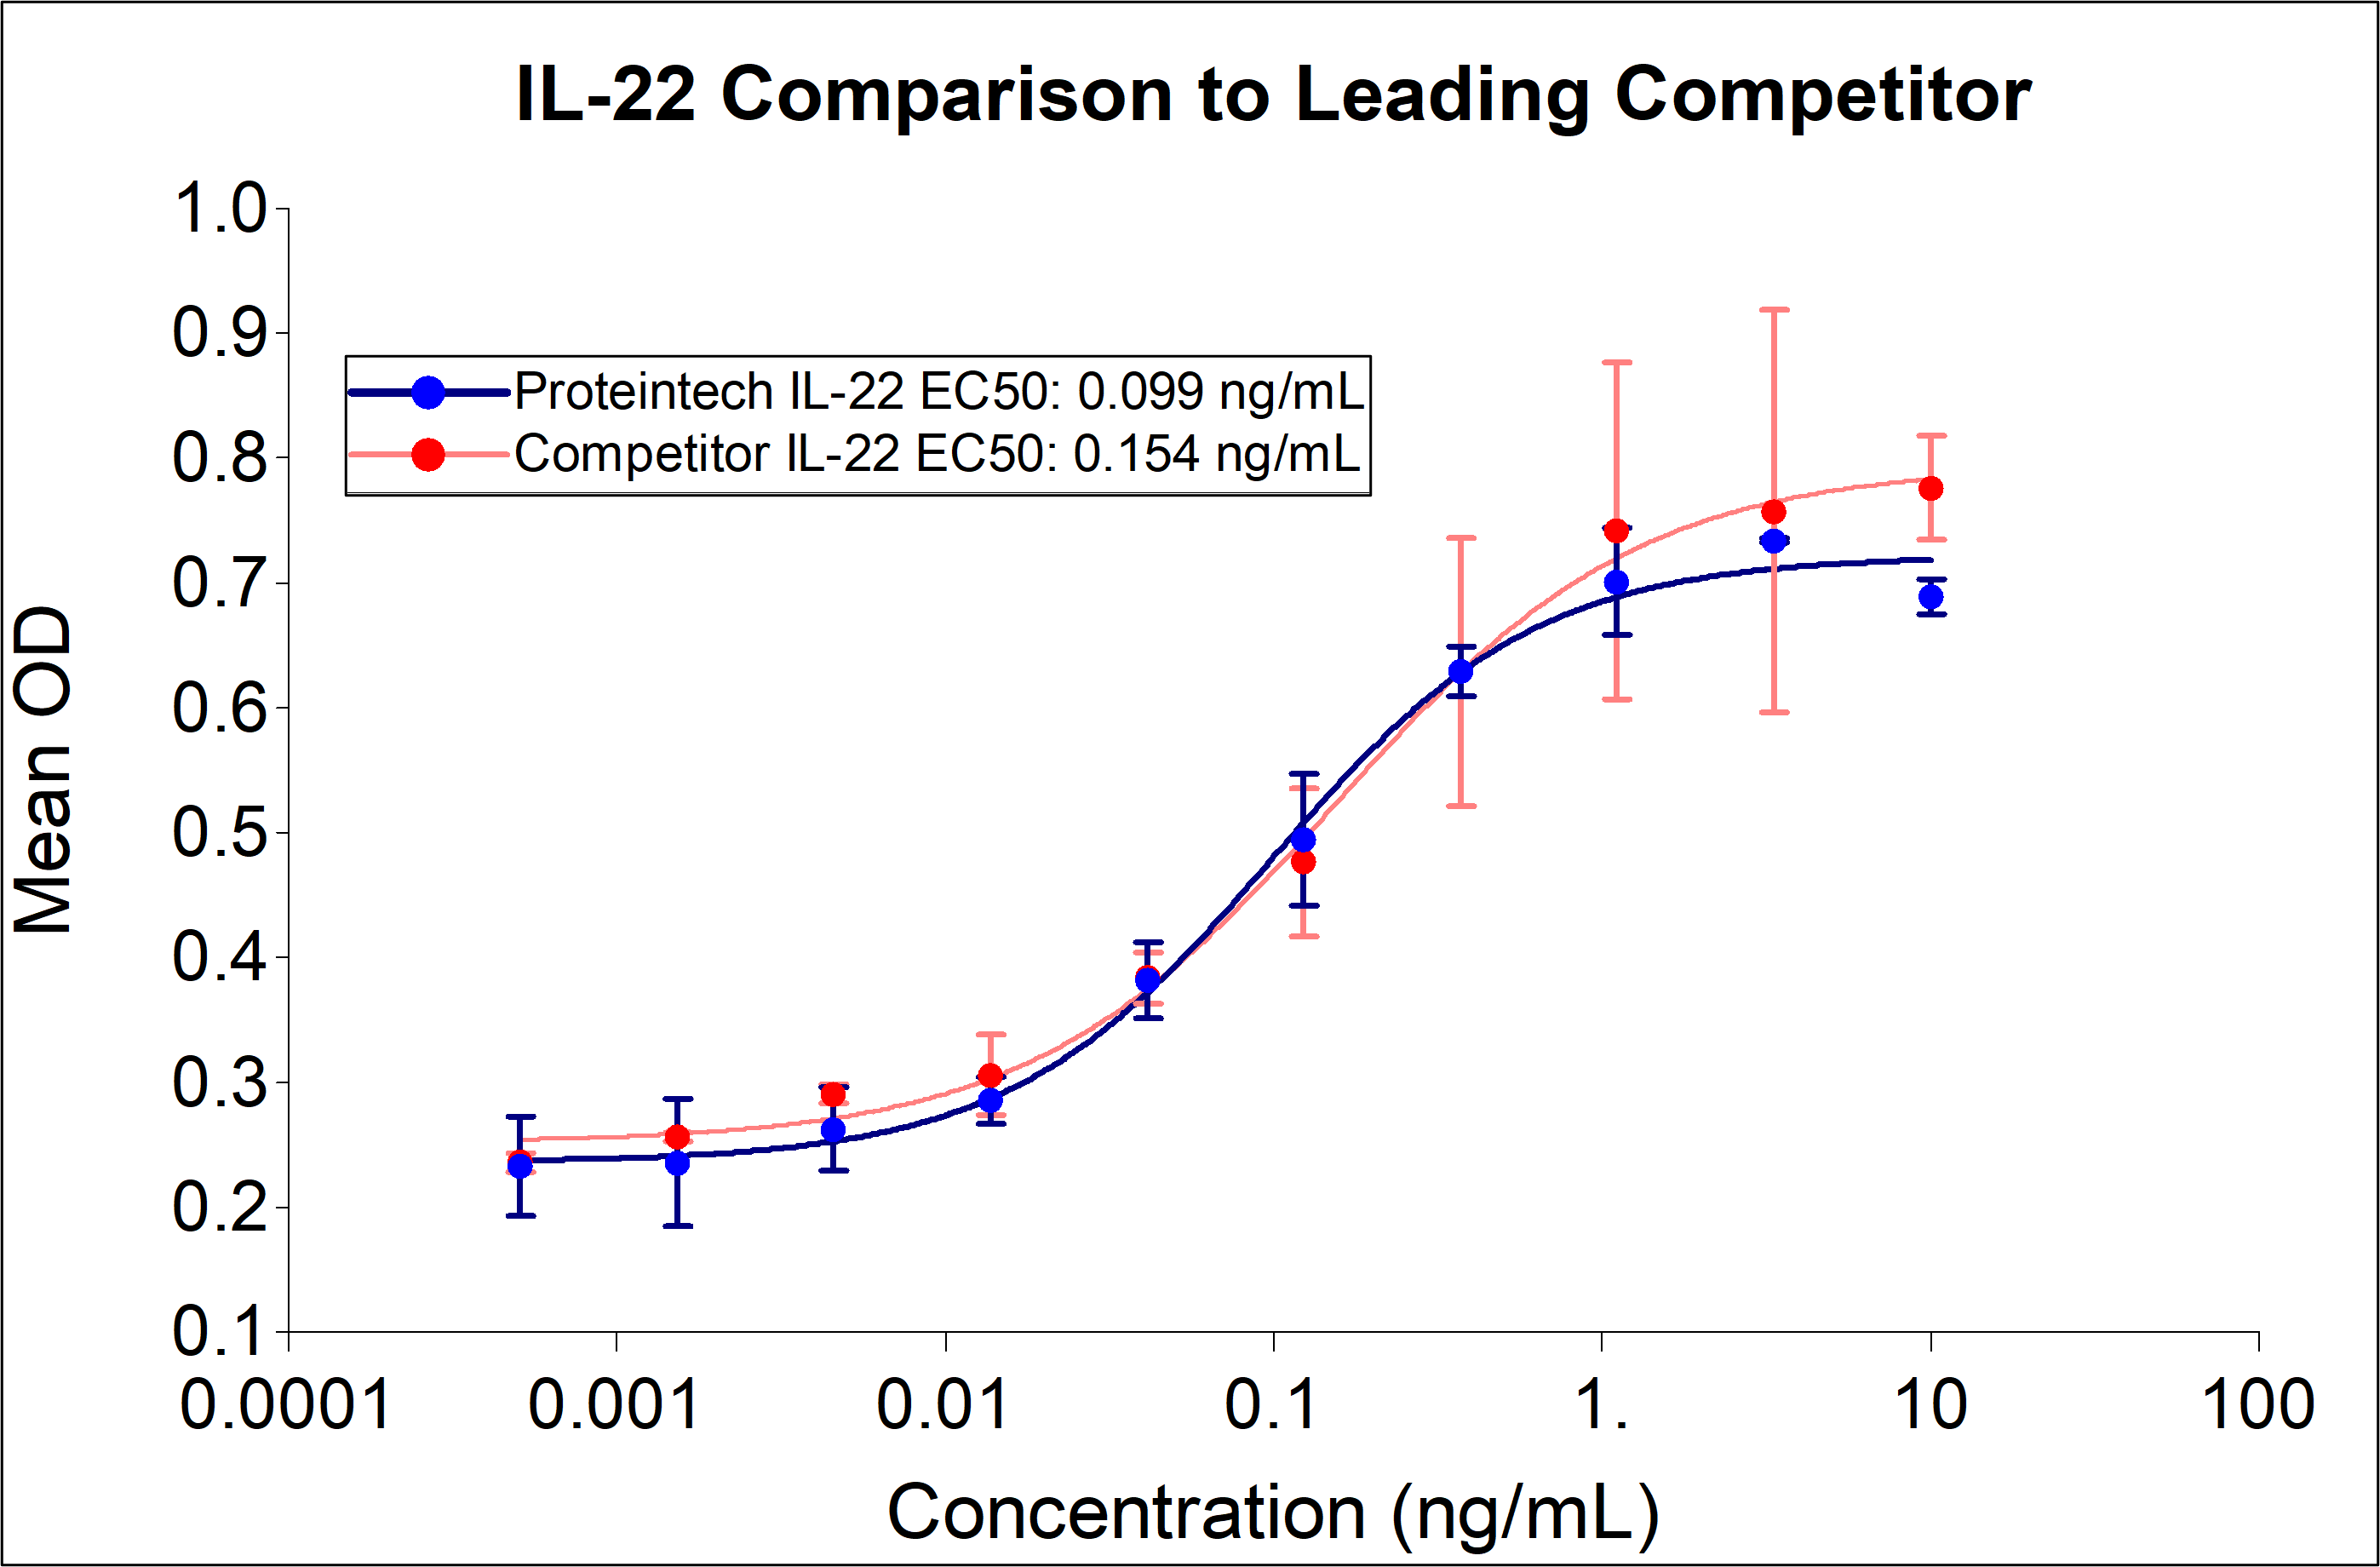 Proteintech IL-22 (Cat no: HZ-1325) demonstrates equivalent induction of IL-10 release and EC50 compared to a leading competitor. Recombinant human IL-22 induces dose-dependent release of IL-10 in the Colo 205 human cell line. Colo 205 cells were treated with increasing concentration of recombinant IL-22 for 24 hours before supernatant collection. The supernatant was tested for IL-10 via ELISA kit. The EC50 was determined using a 4-parameter non-linear regression model. The EC50 range in 0.045-0.225 ng/mL.